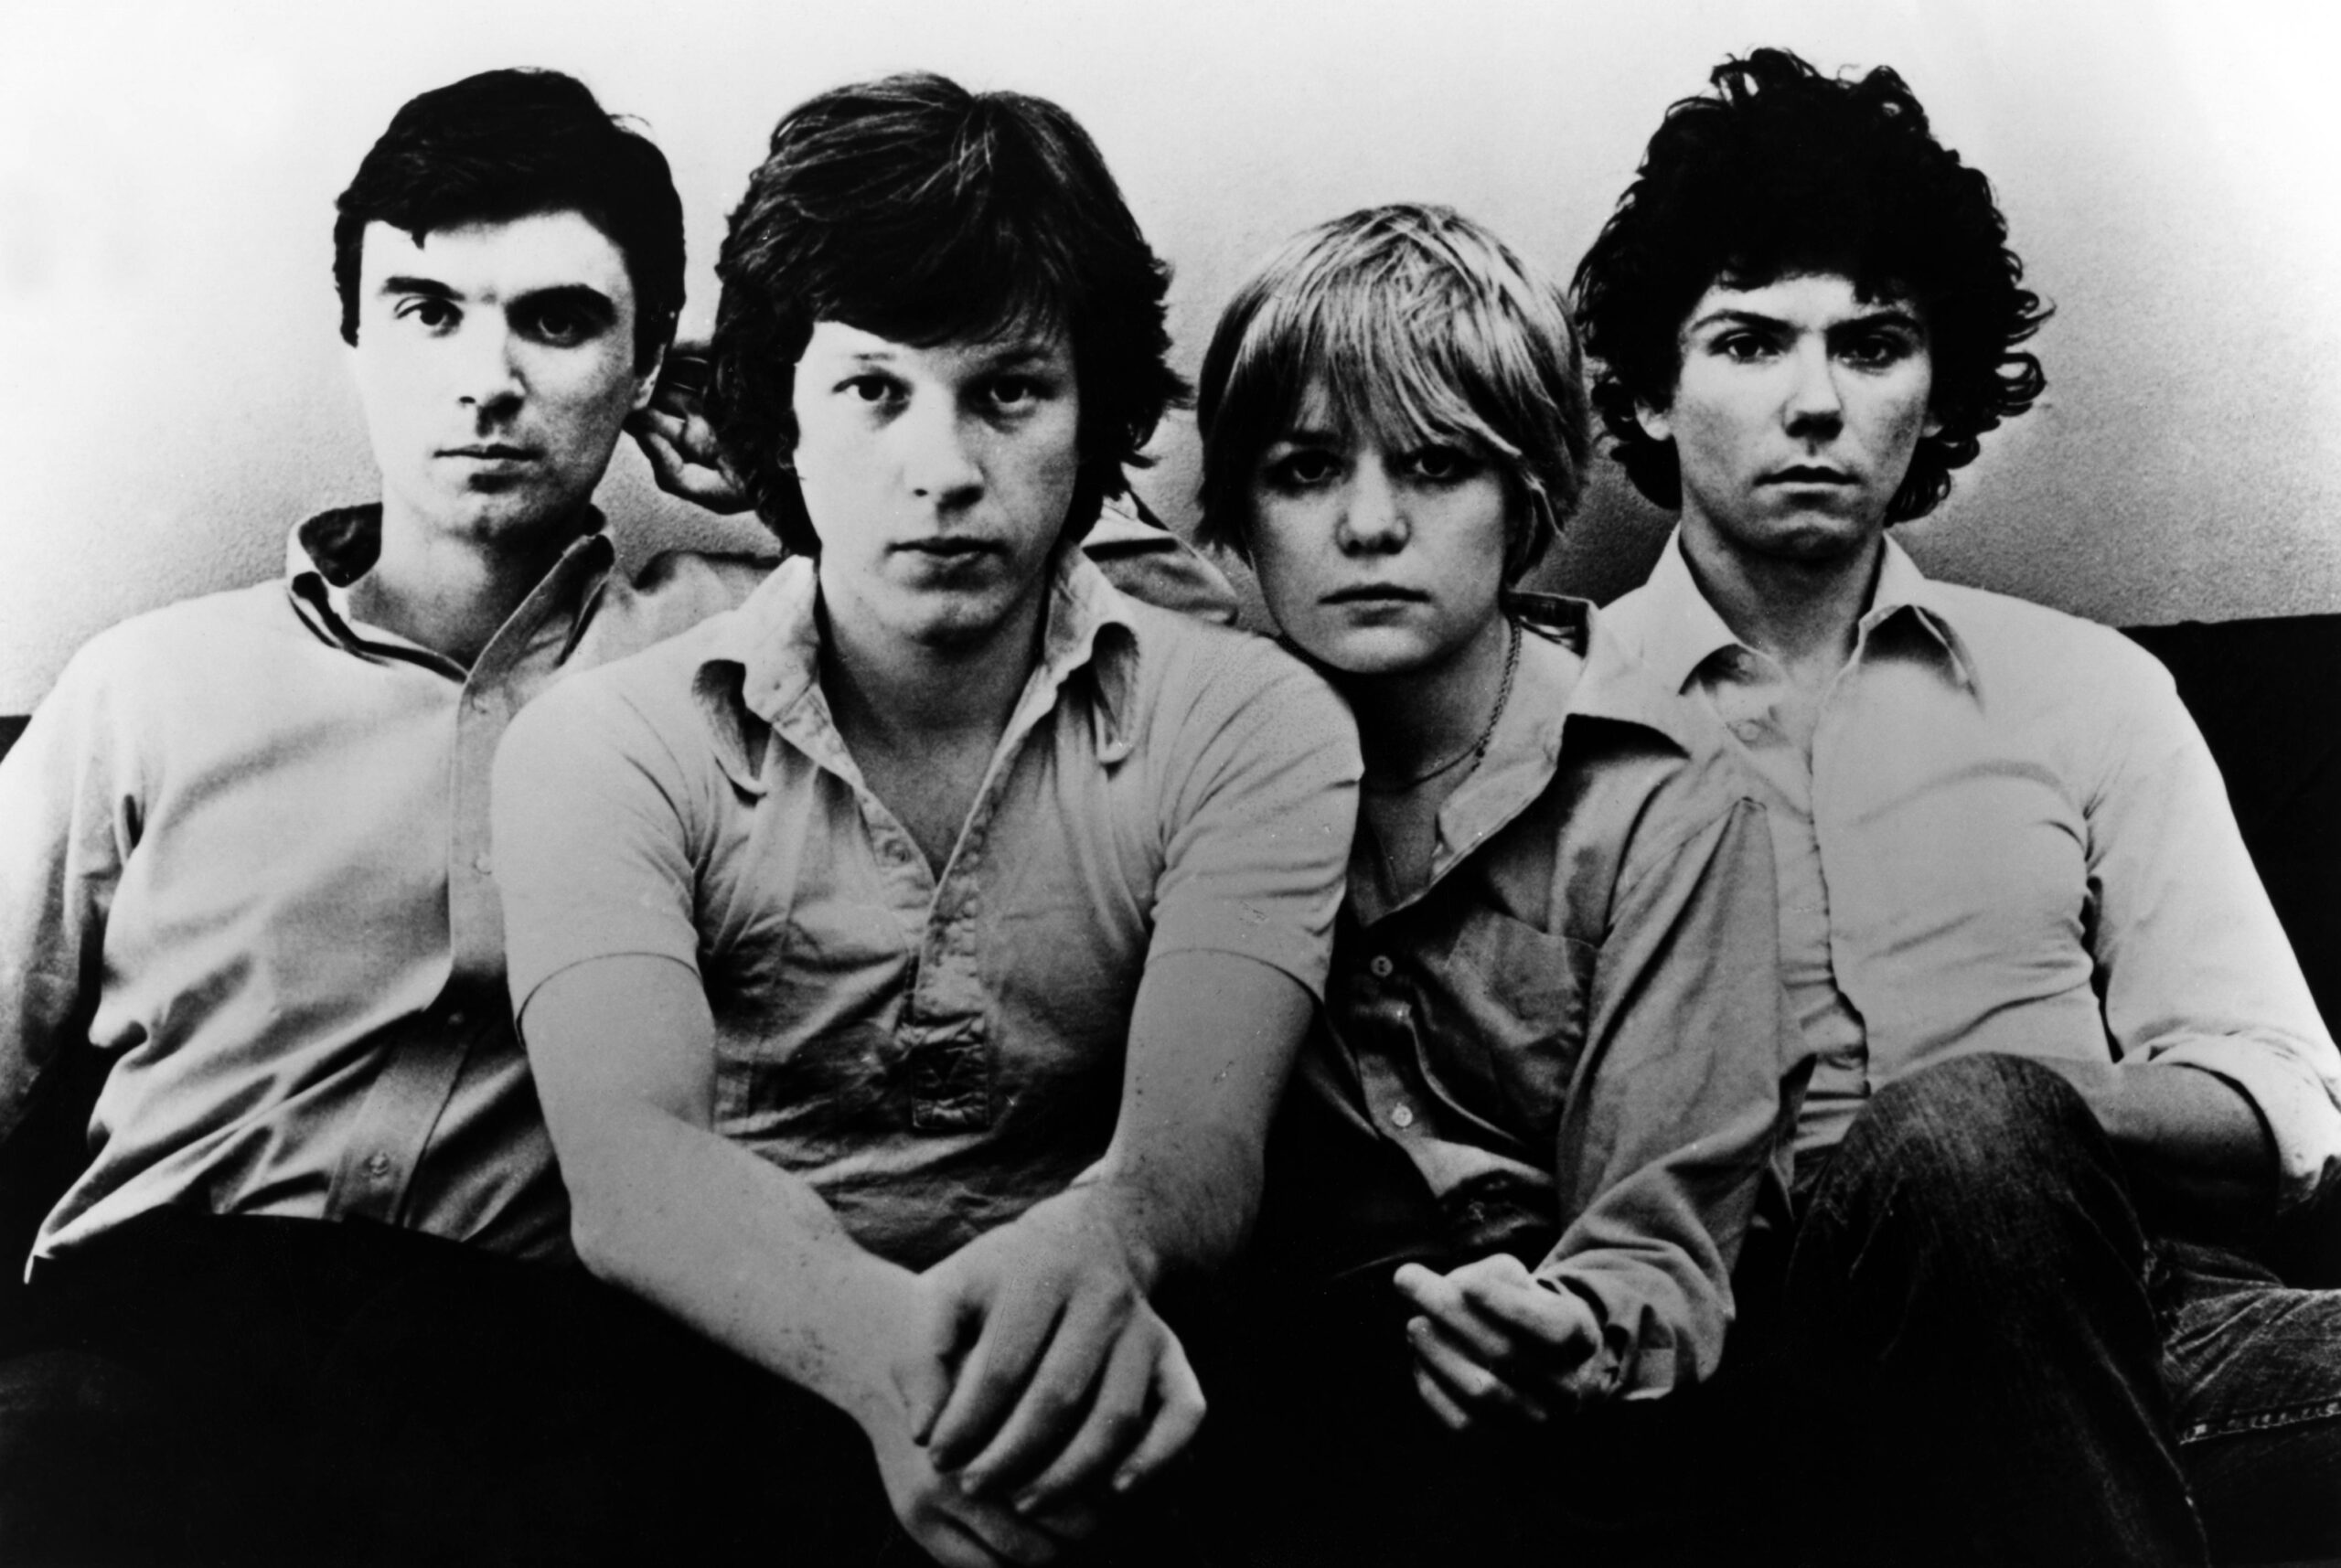 Talking Heads: L-R: David Byrne, Chris Frantz, Tina Weymouth, and Jerry Harrison  (Credit: Echoes/Redferns)